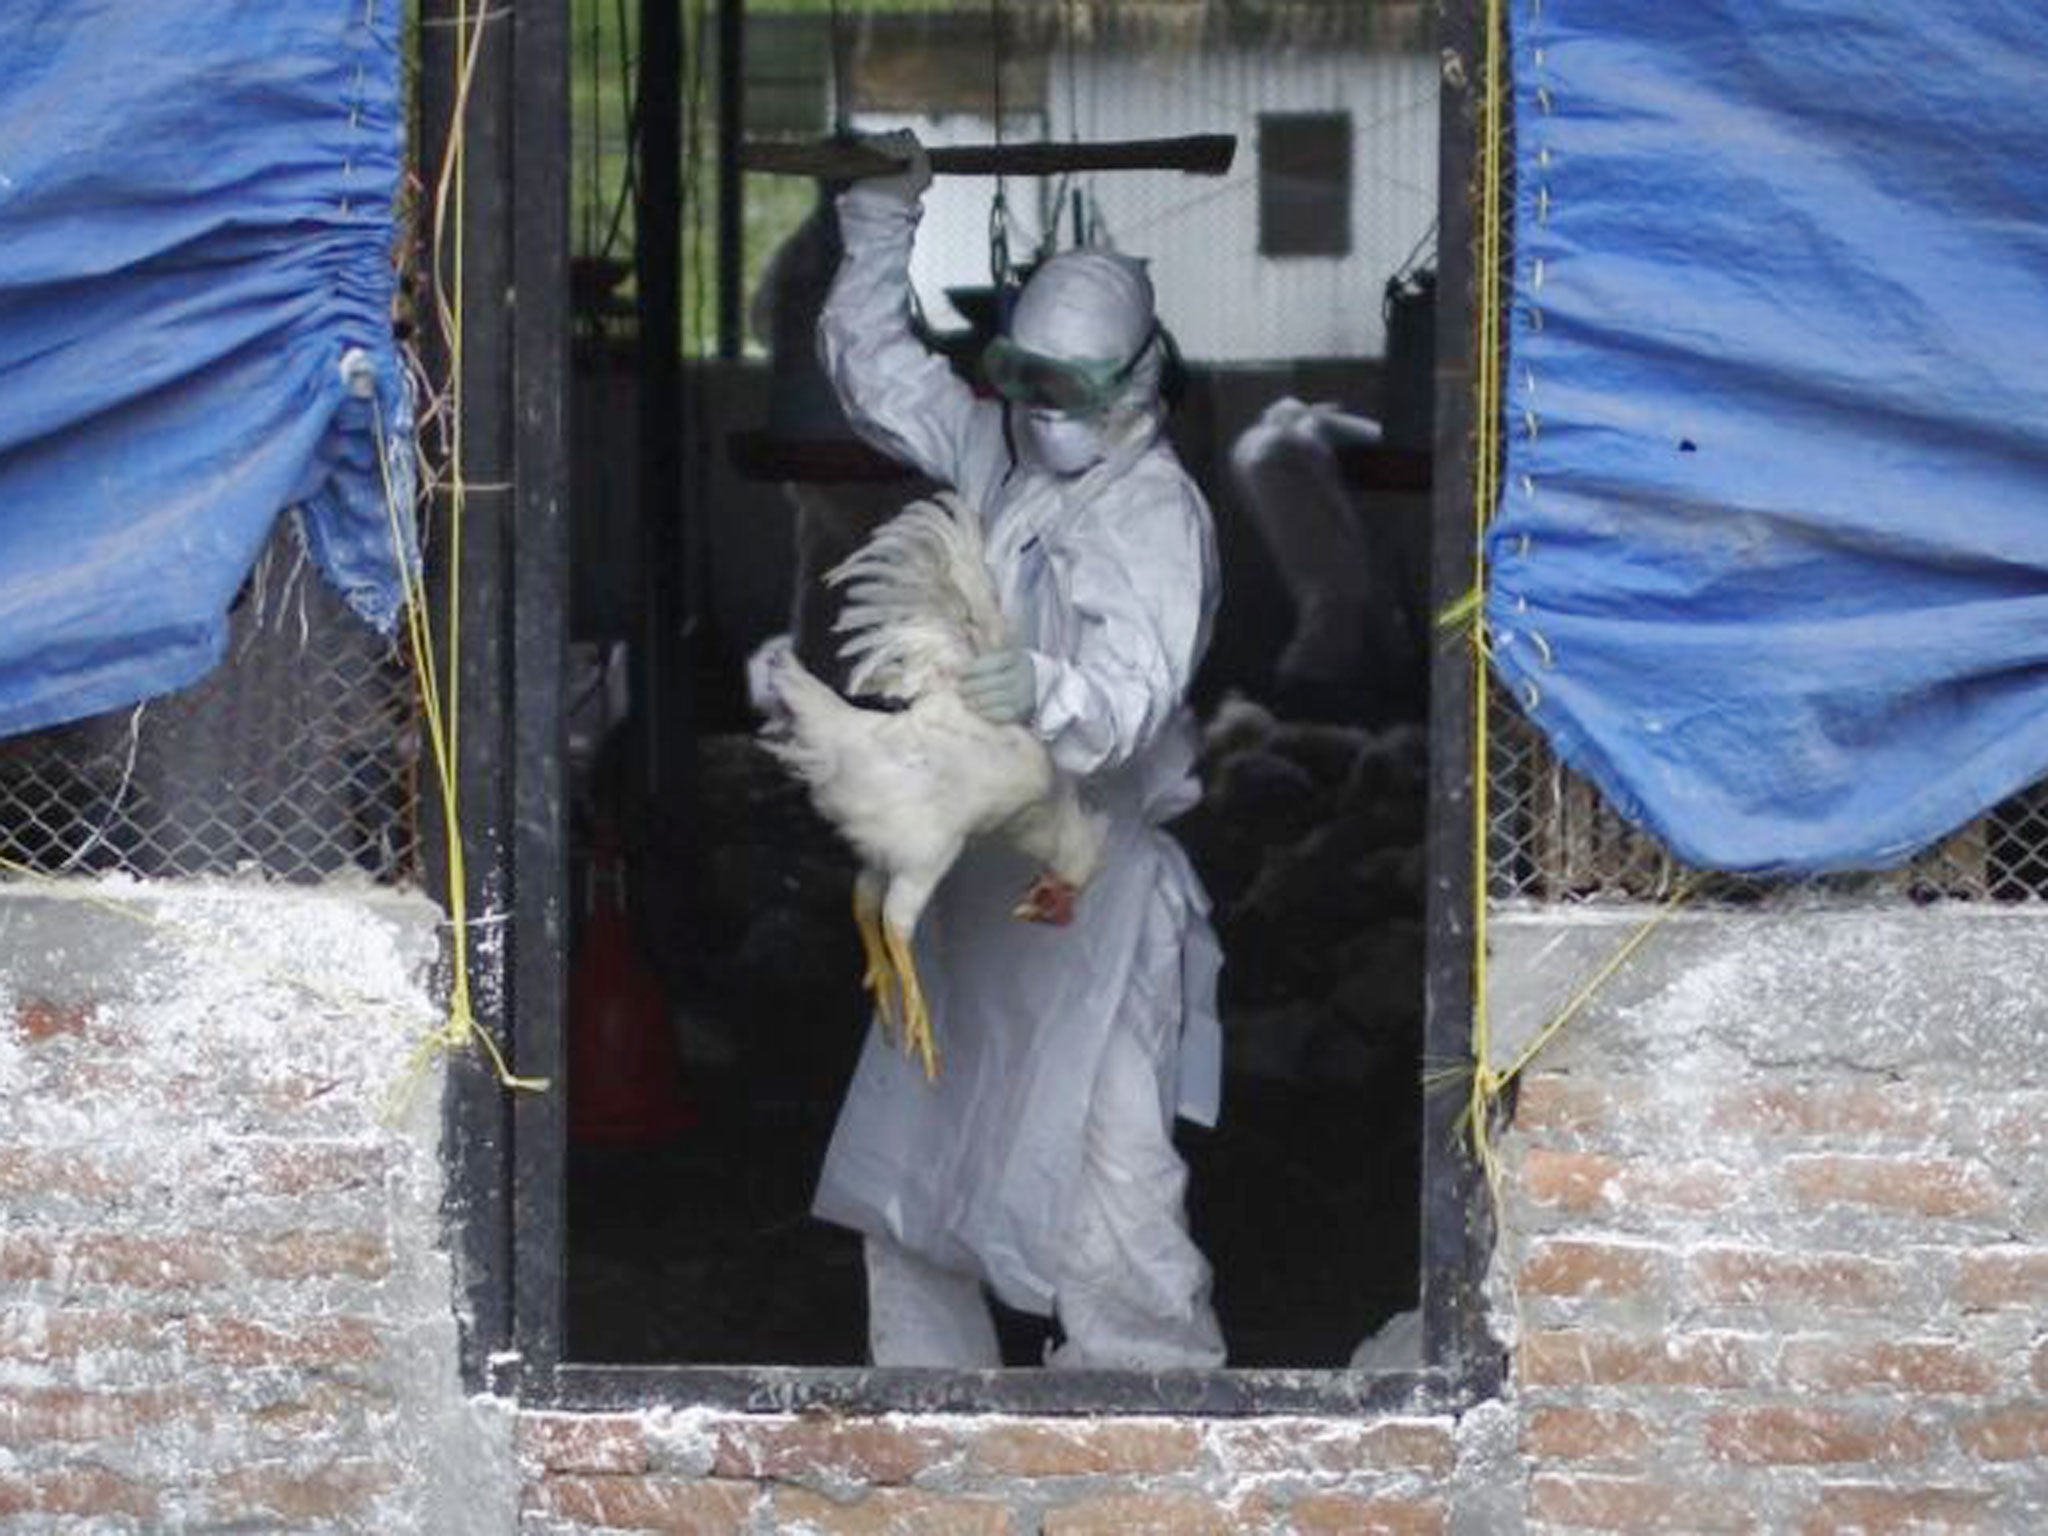 Britain was previously declared free of avian influenza in 2017